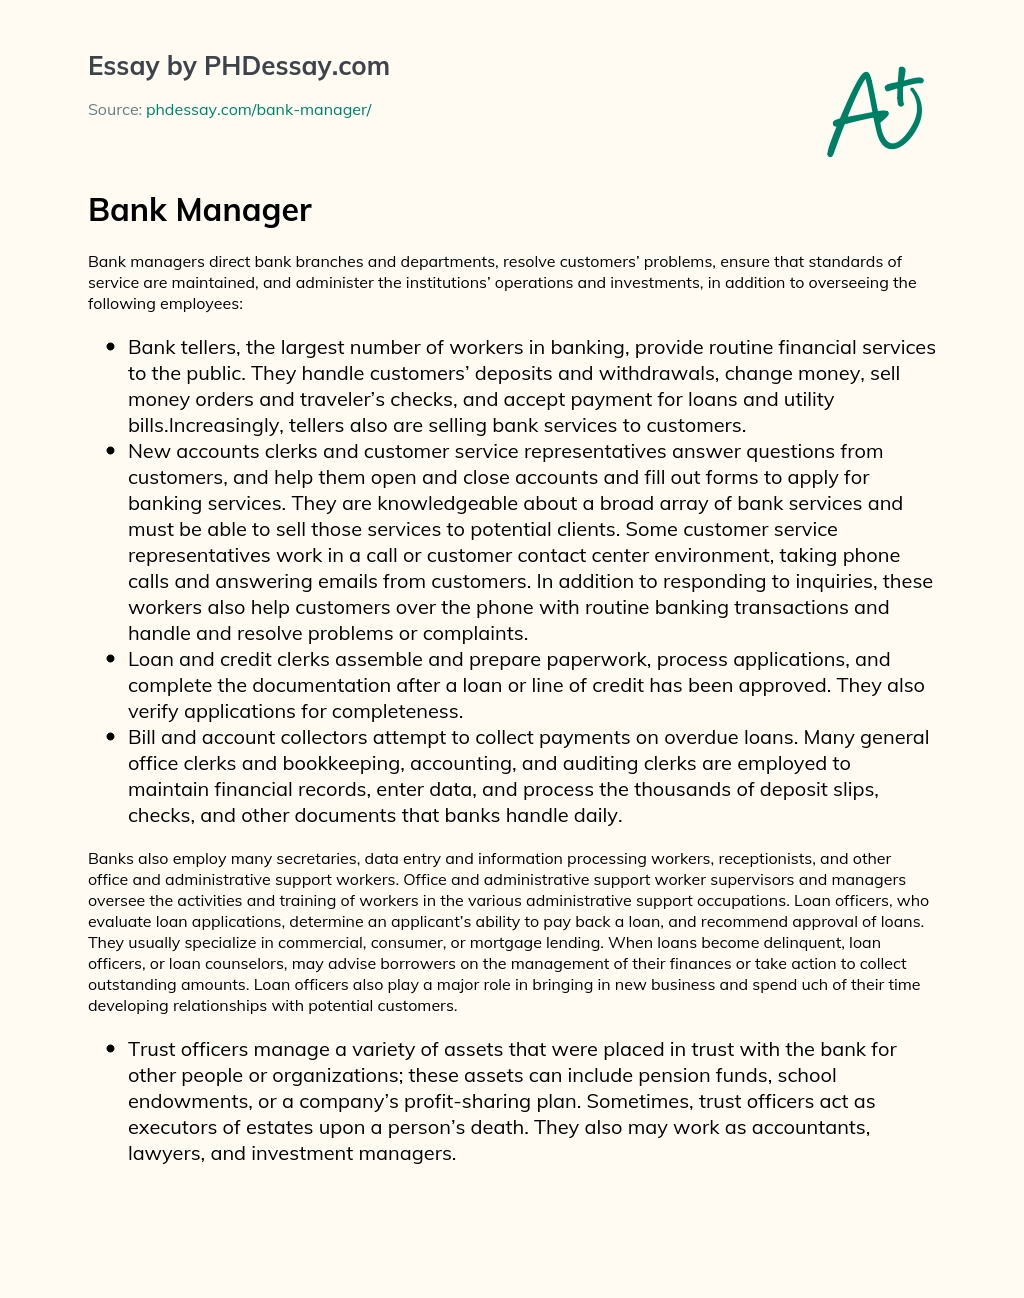 Roles and Responsibilities of Bank Managers and Other Employees essay